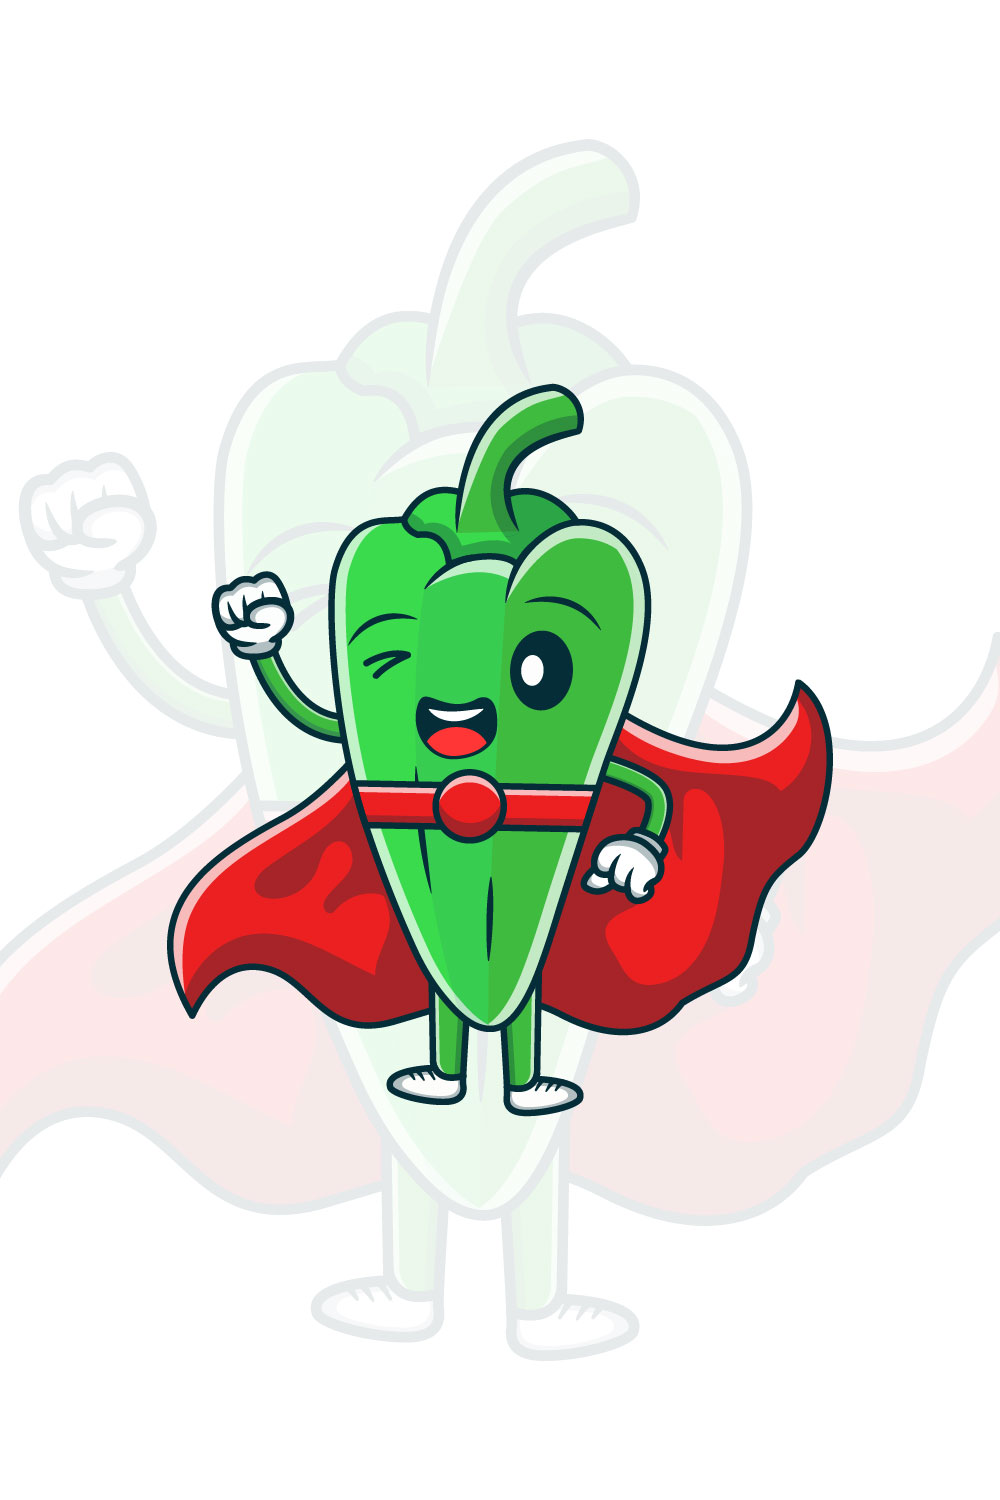 Cute green chili super hero cartoon characters vector icon illustration pinterest preview image.